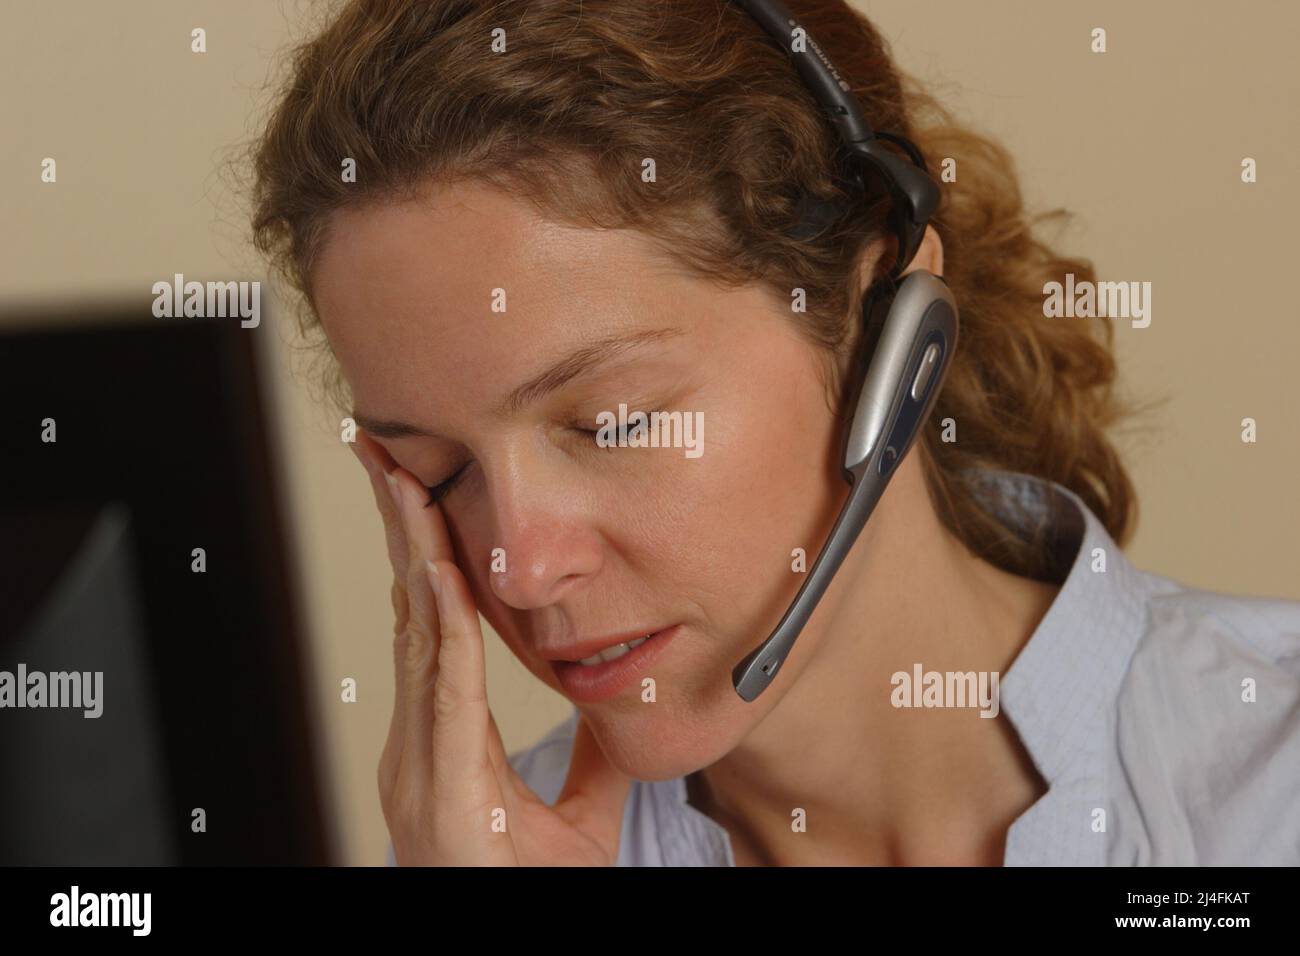 young woman with headset Stock Photo